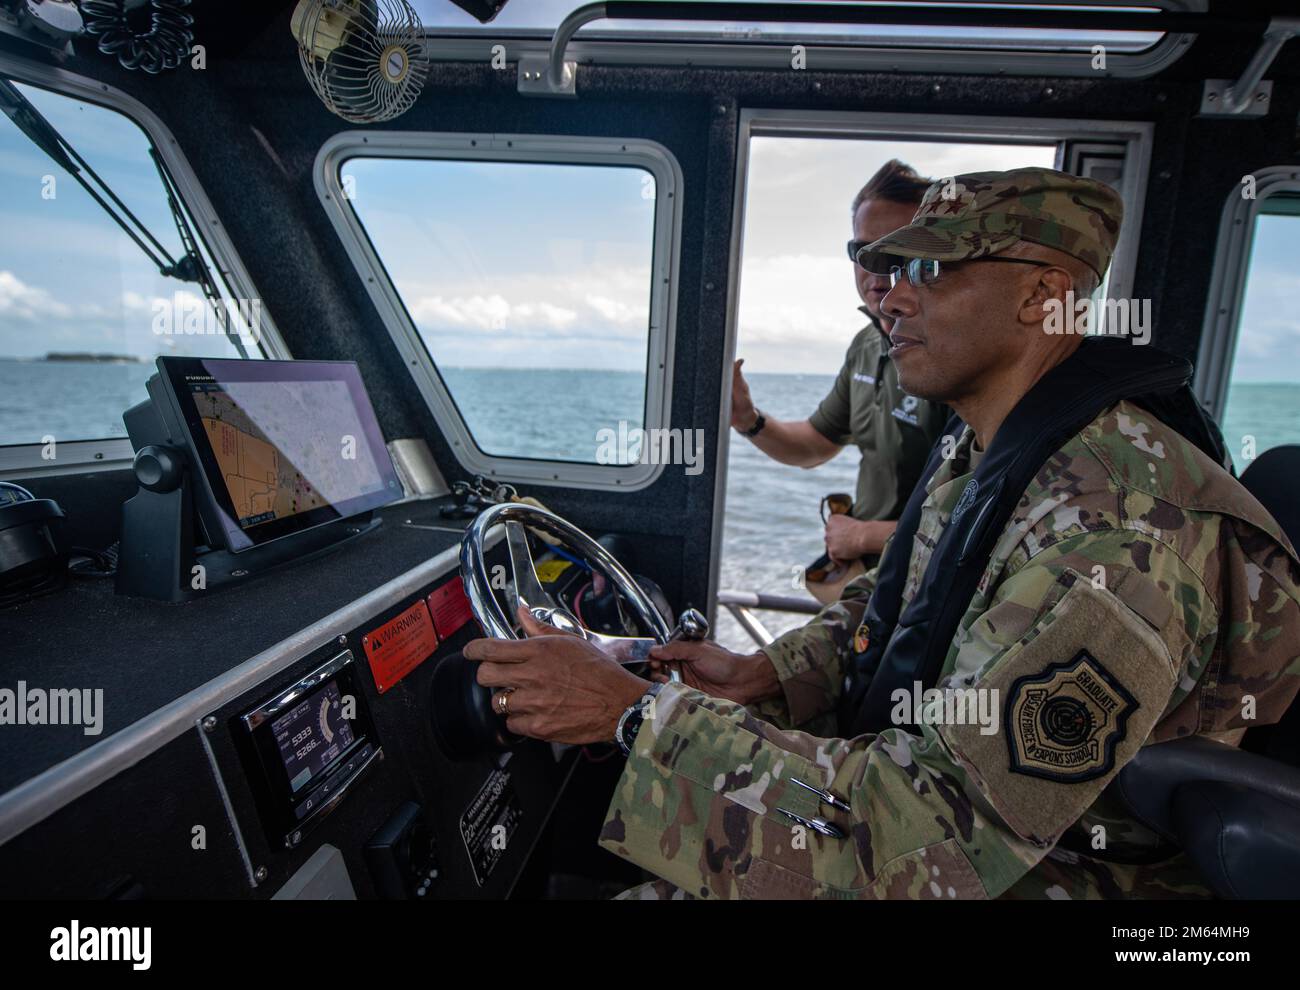 U.S. Air Force Chief of Staff Gen. CQ Brown, Jr. operates a marine patrol vessel assigned to the 6th Security Forces Squadron during a tour at MacDill Air Force Base, Florida, April 1, 2022. Gen. Brown visited the base to meet with Airmen and experience first-hand the innovative ways they're advancing the mission. Stock Photo